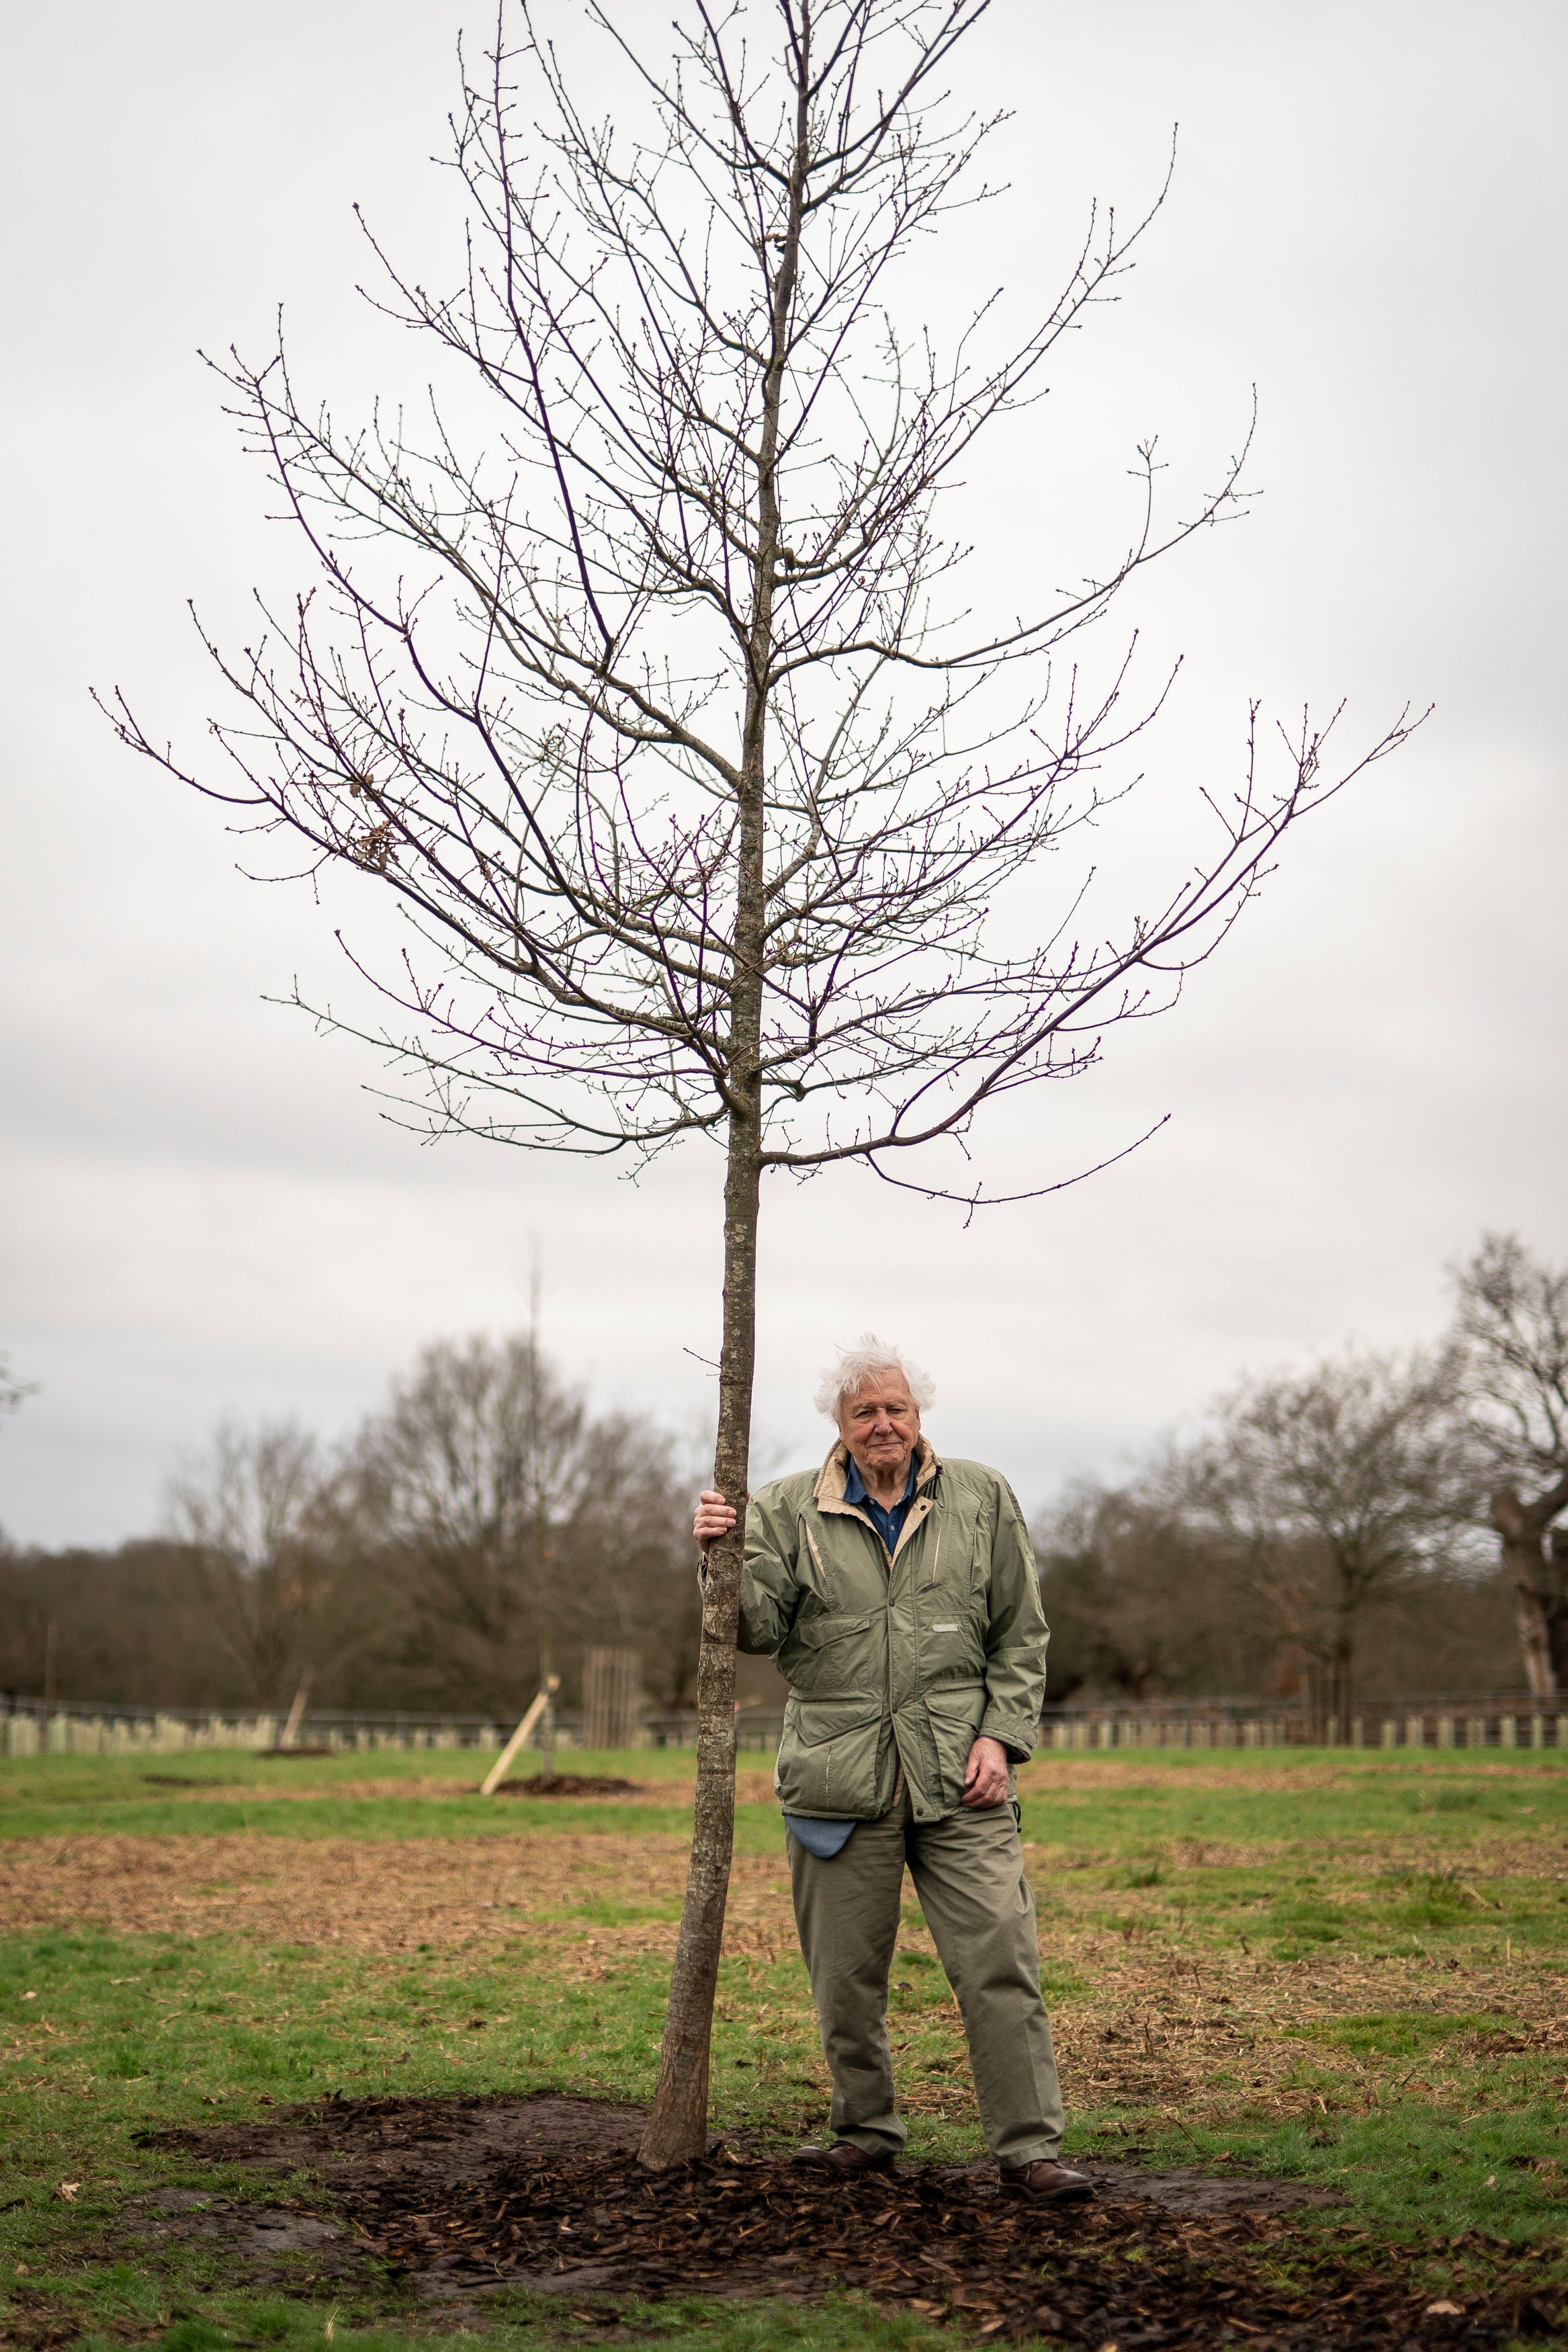 Sir David Attenborough plants a tree, in honour of Queen Elizabeth II, for The Queen's Green Canopy in Richmond Park with school children from across London